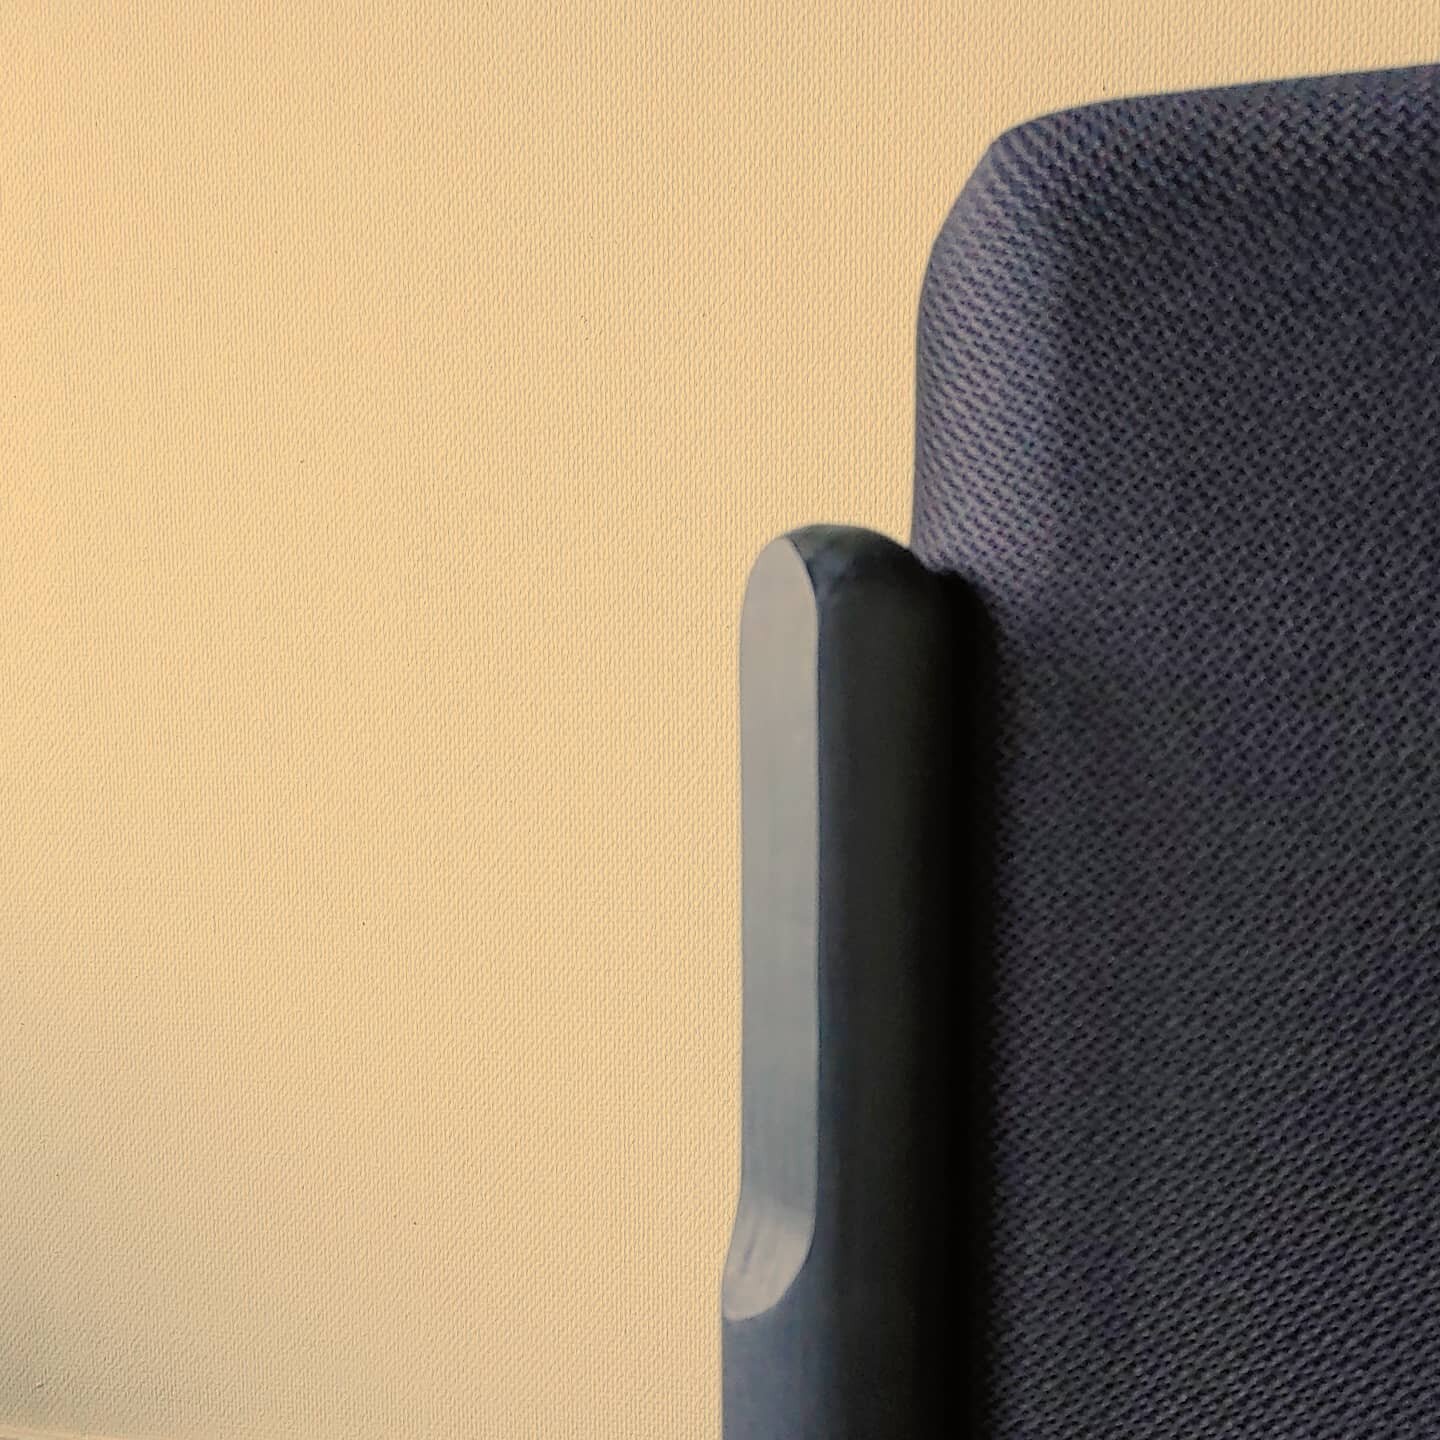 The speaker is not only available in grey, but also in full black. This elegant version fits in your modern home like a musical butler. 

Get yours now at Kubuni.nl

#audiophile #audio #interiordesign #productdevelopment #zwolle #productontwerp #dutc